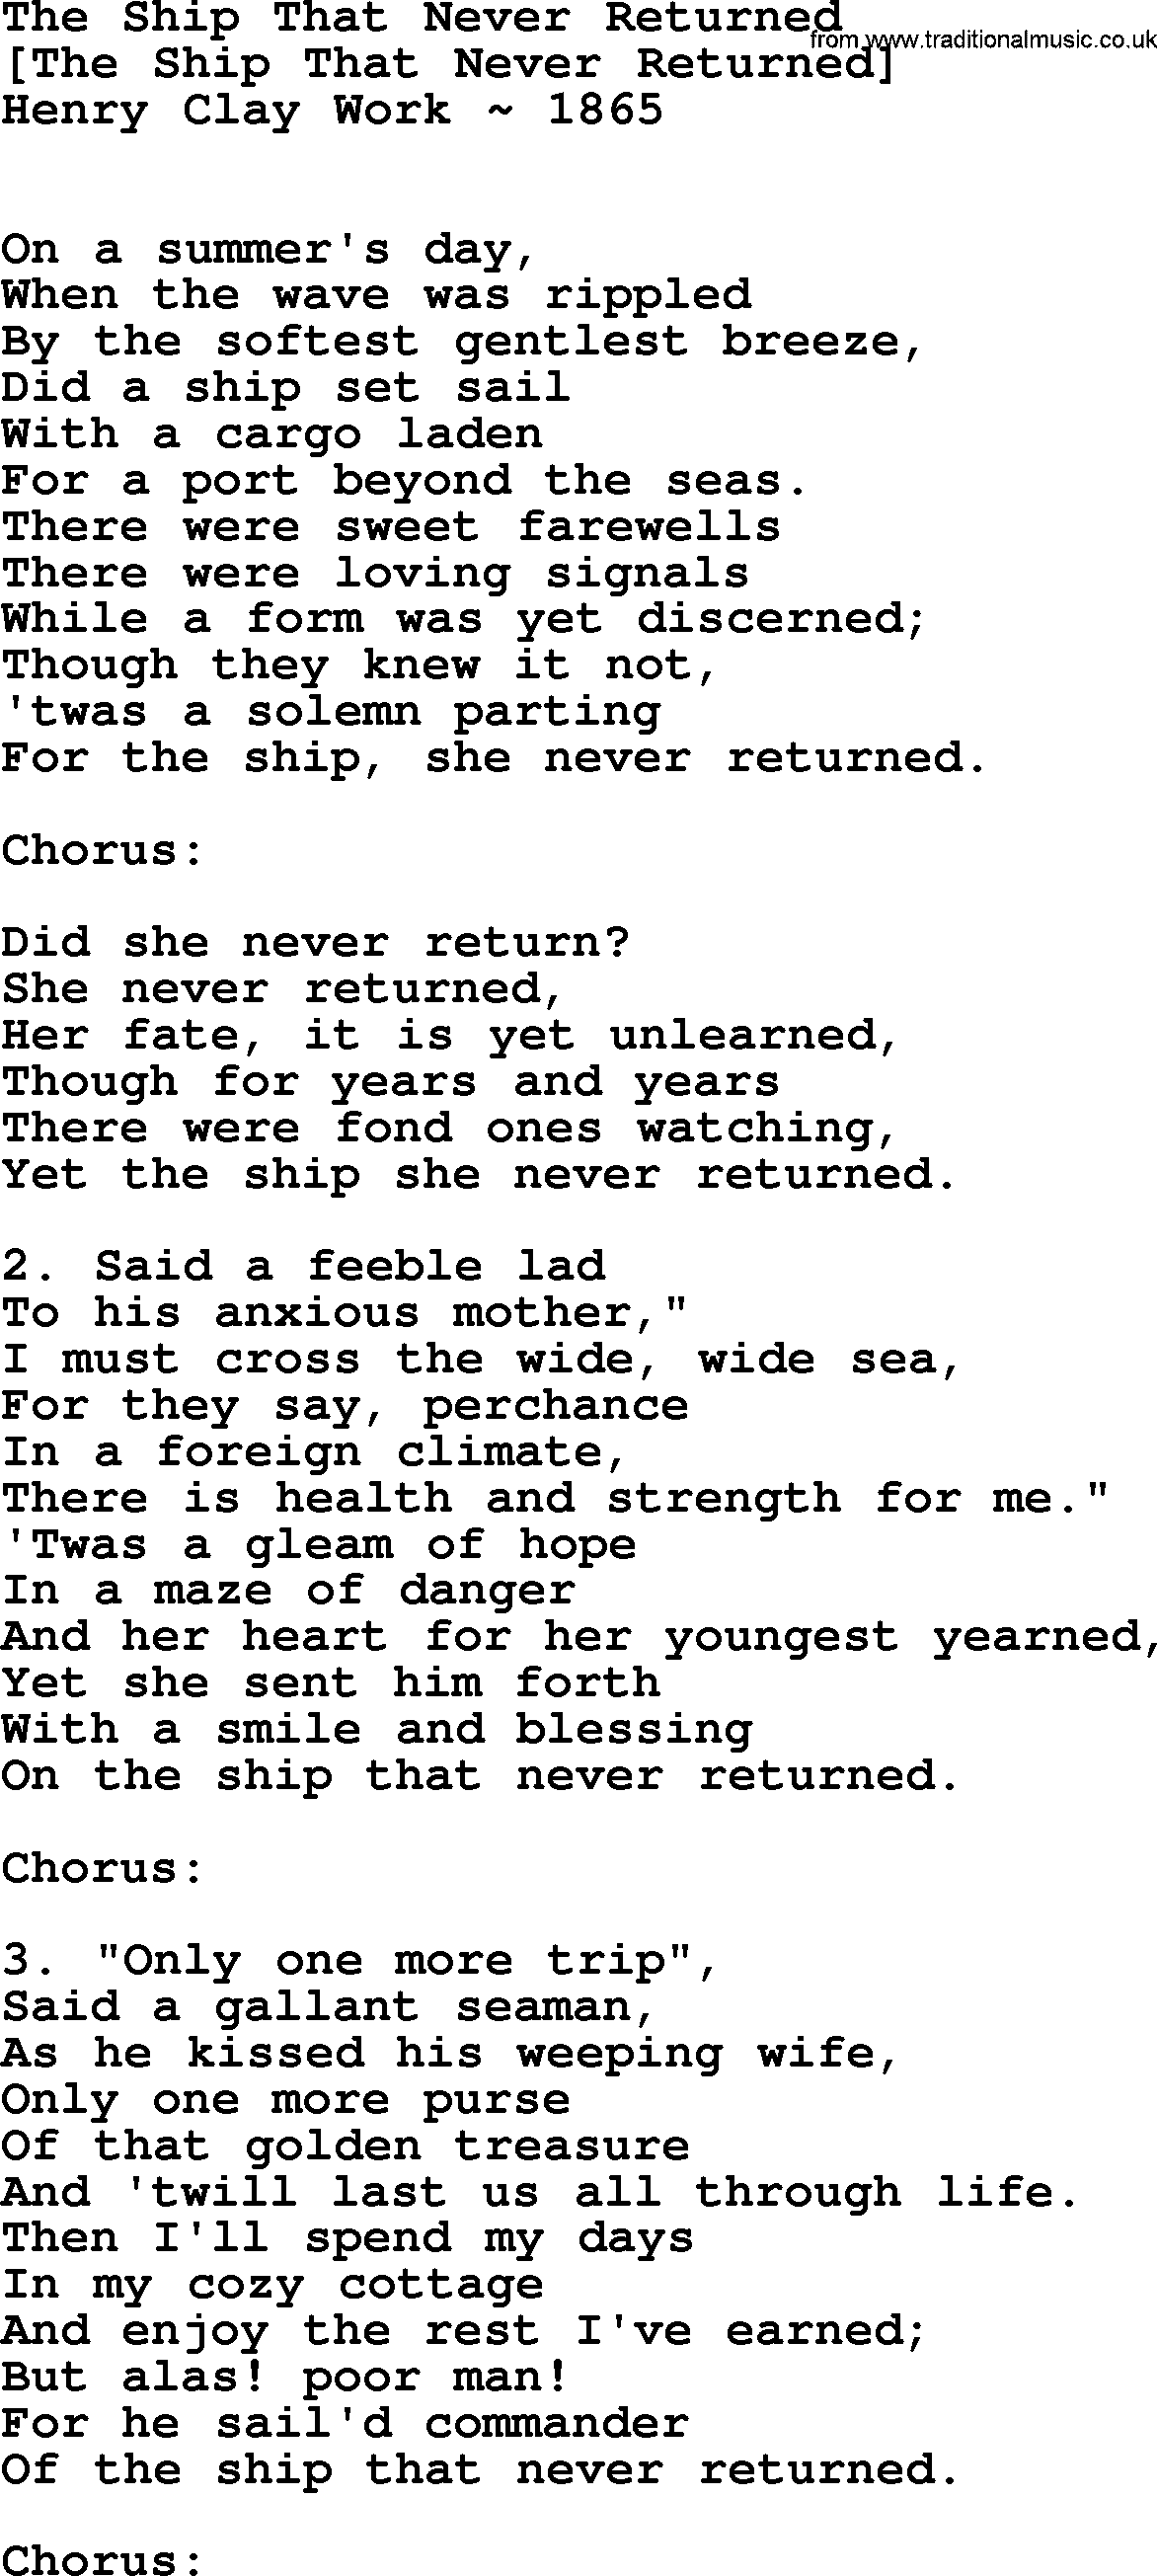 Old American Song: The Ship That Never Returned, lyrics